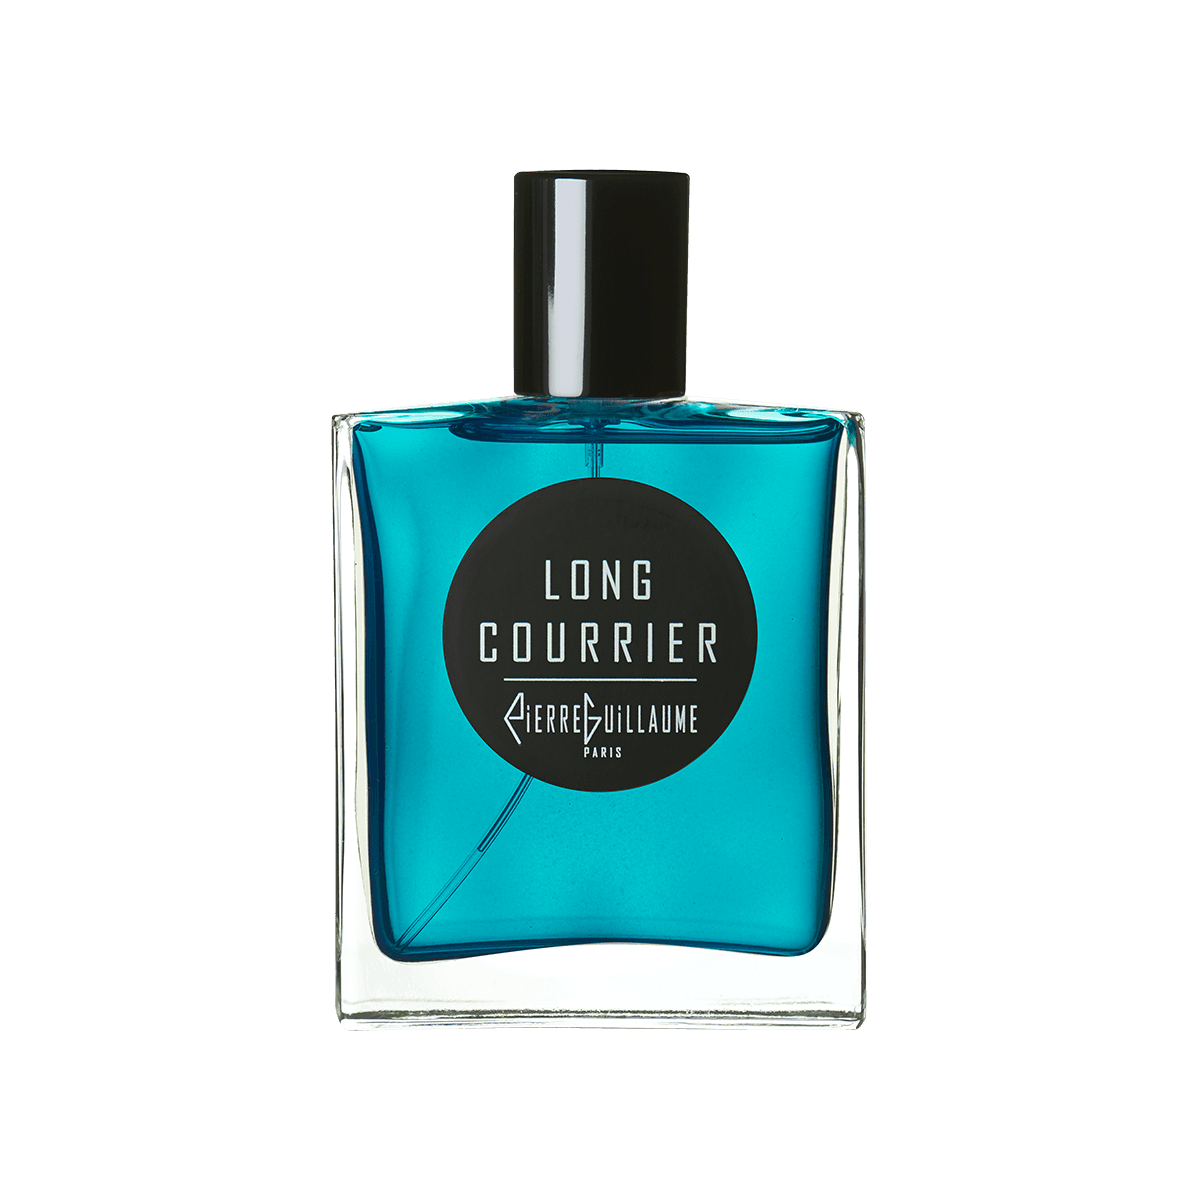 Pierre Guillaume Croisiere - Long-Courrier 50 ml | Perfume Lounge